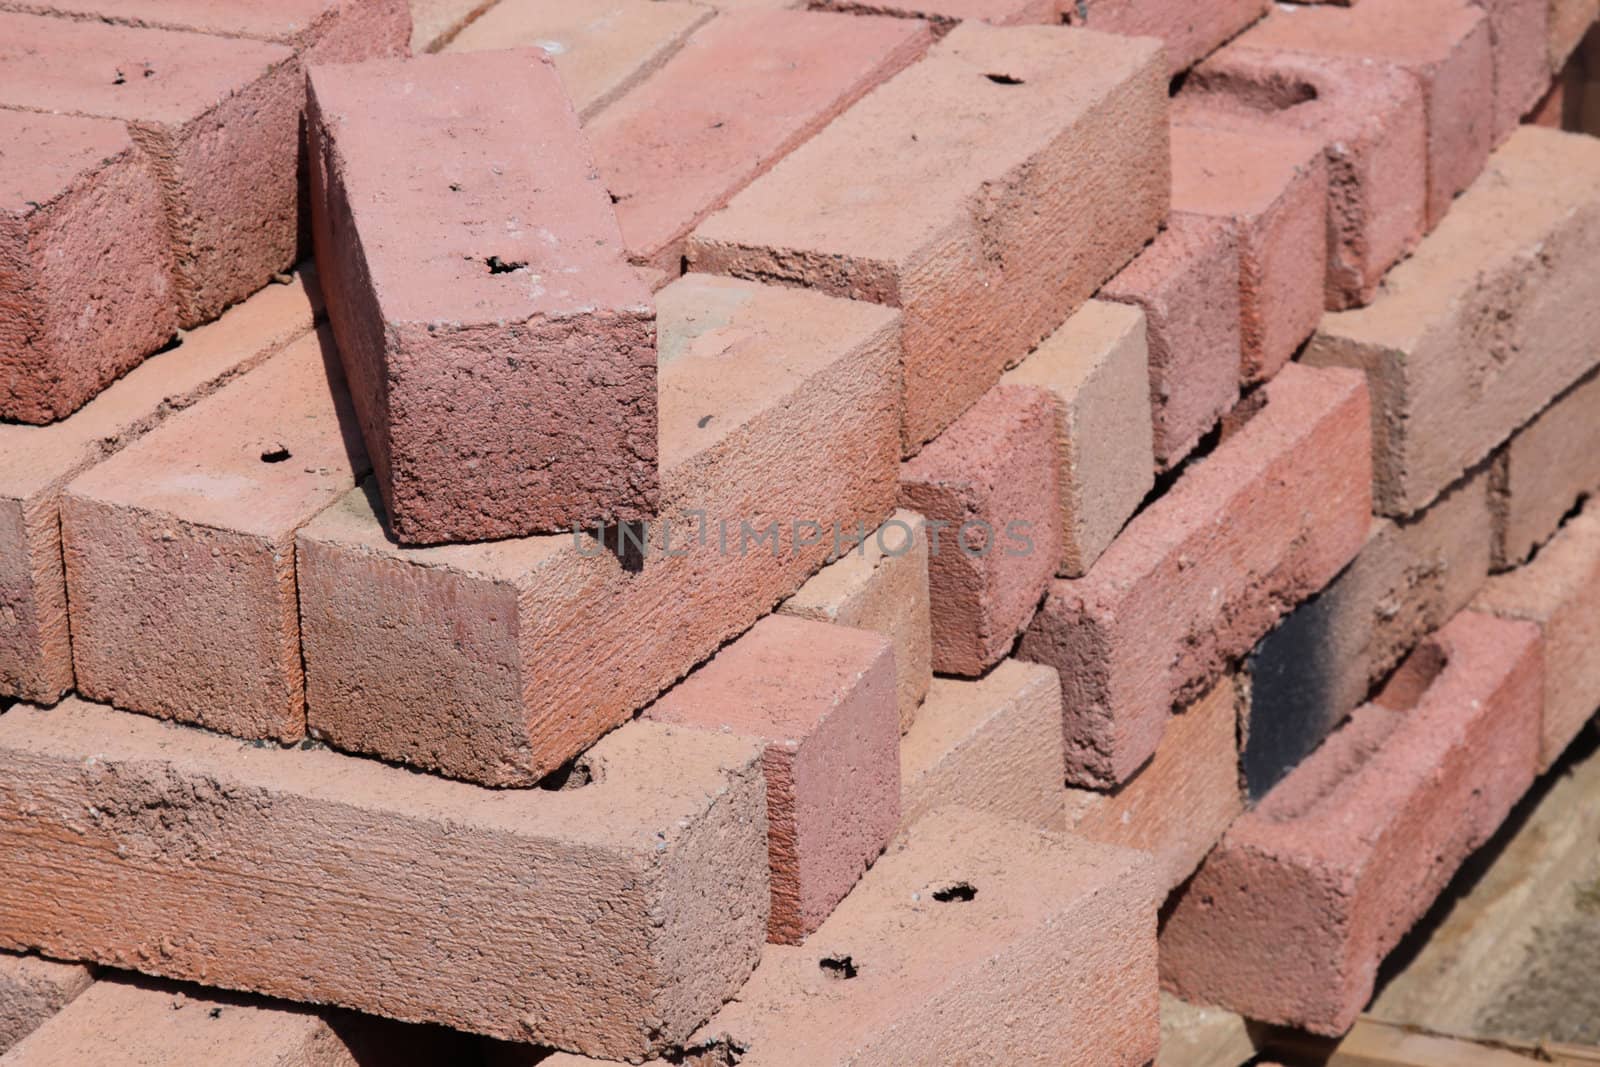 A pile of red bricks at a construction site.